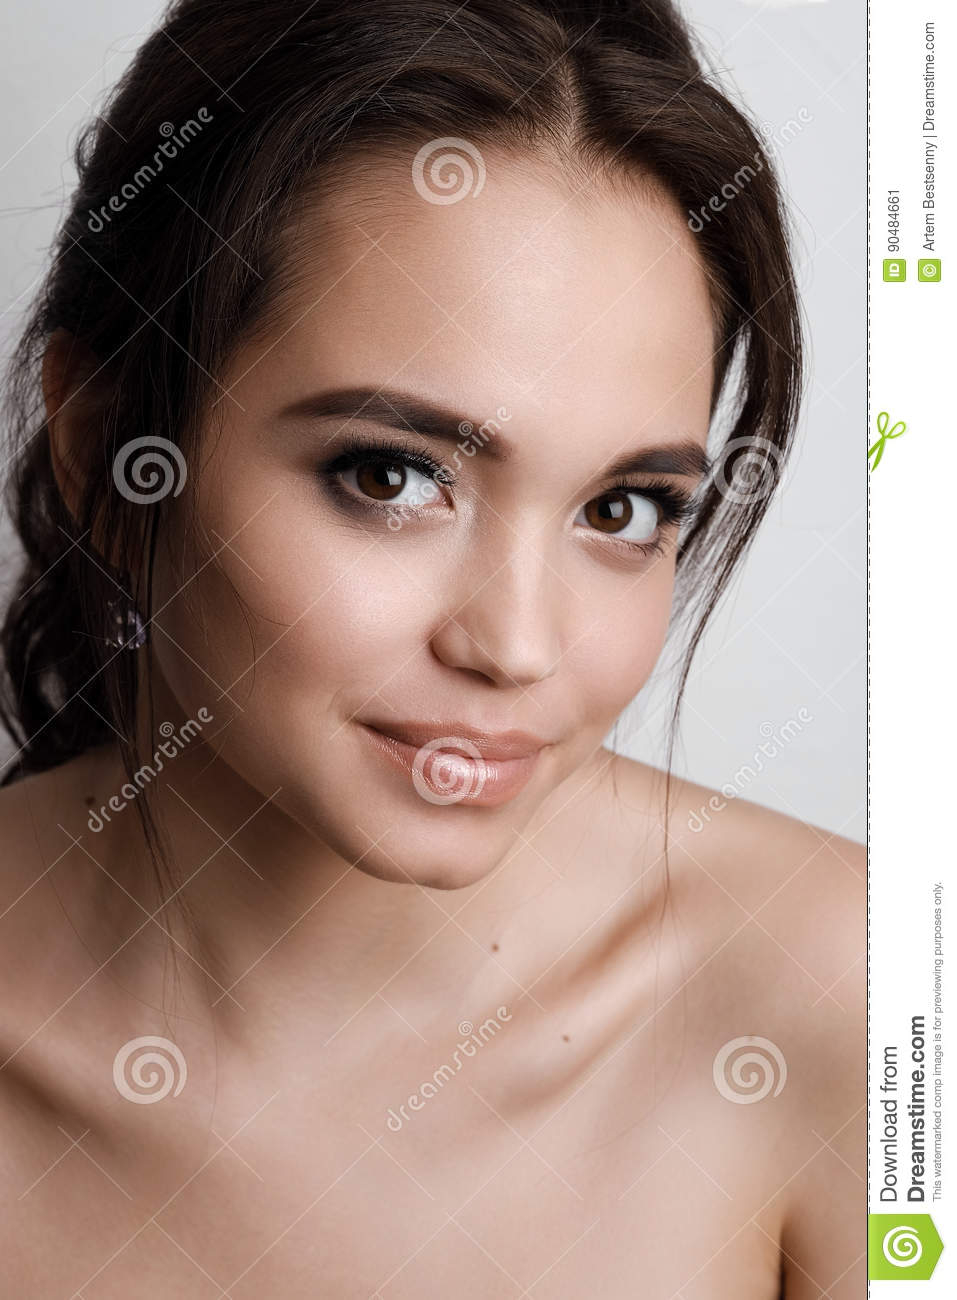 Natural Makeup For Brown Eyes Portrait Of A Young Girl Brunette With Brown Eyes And Soft Natural